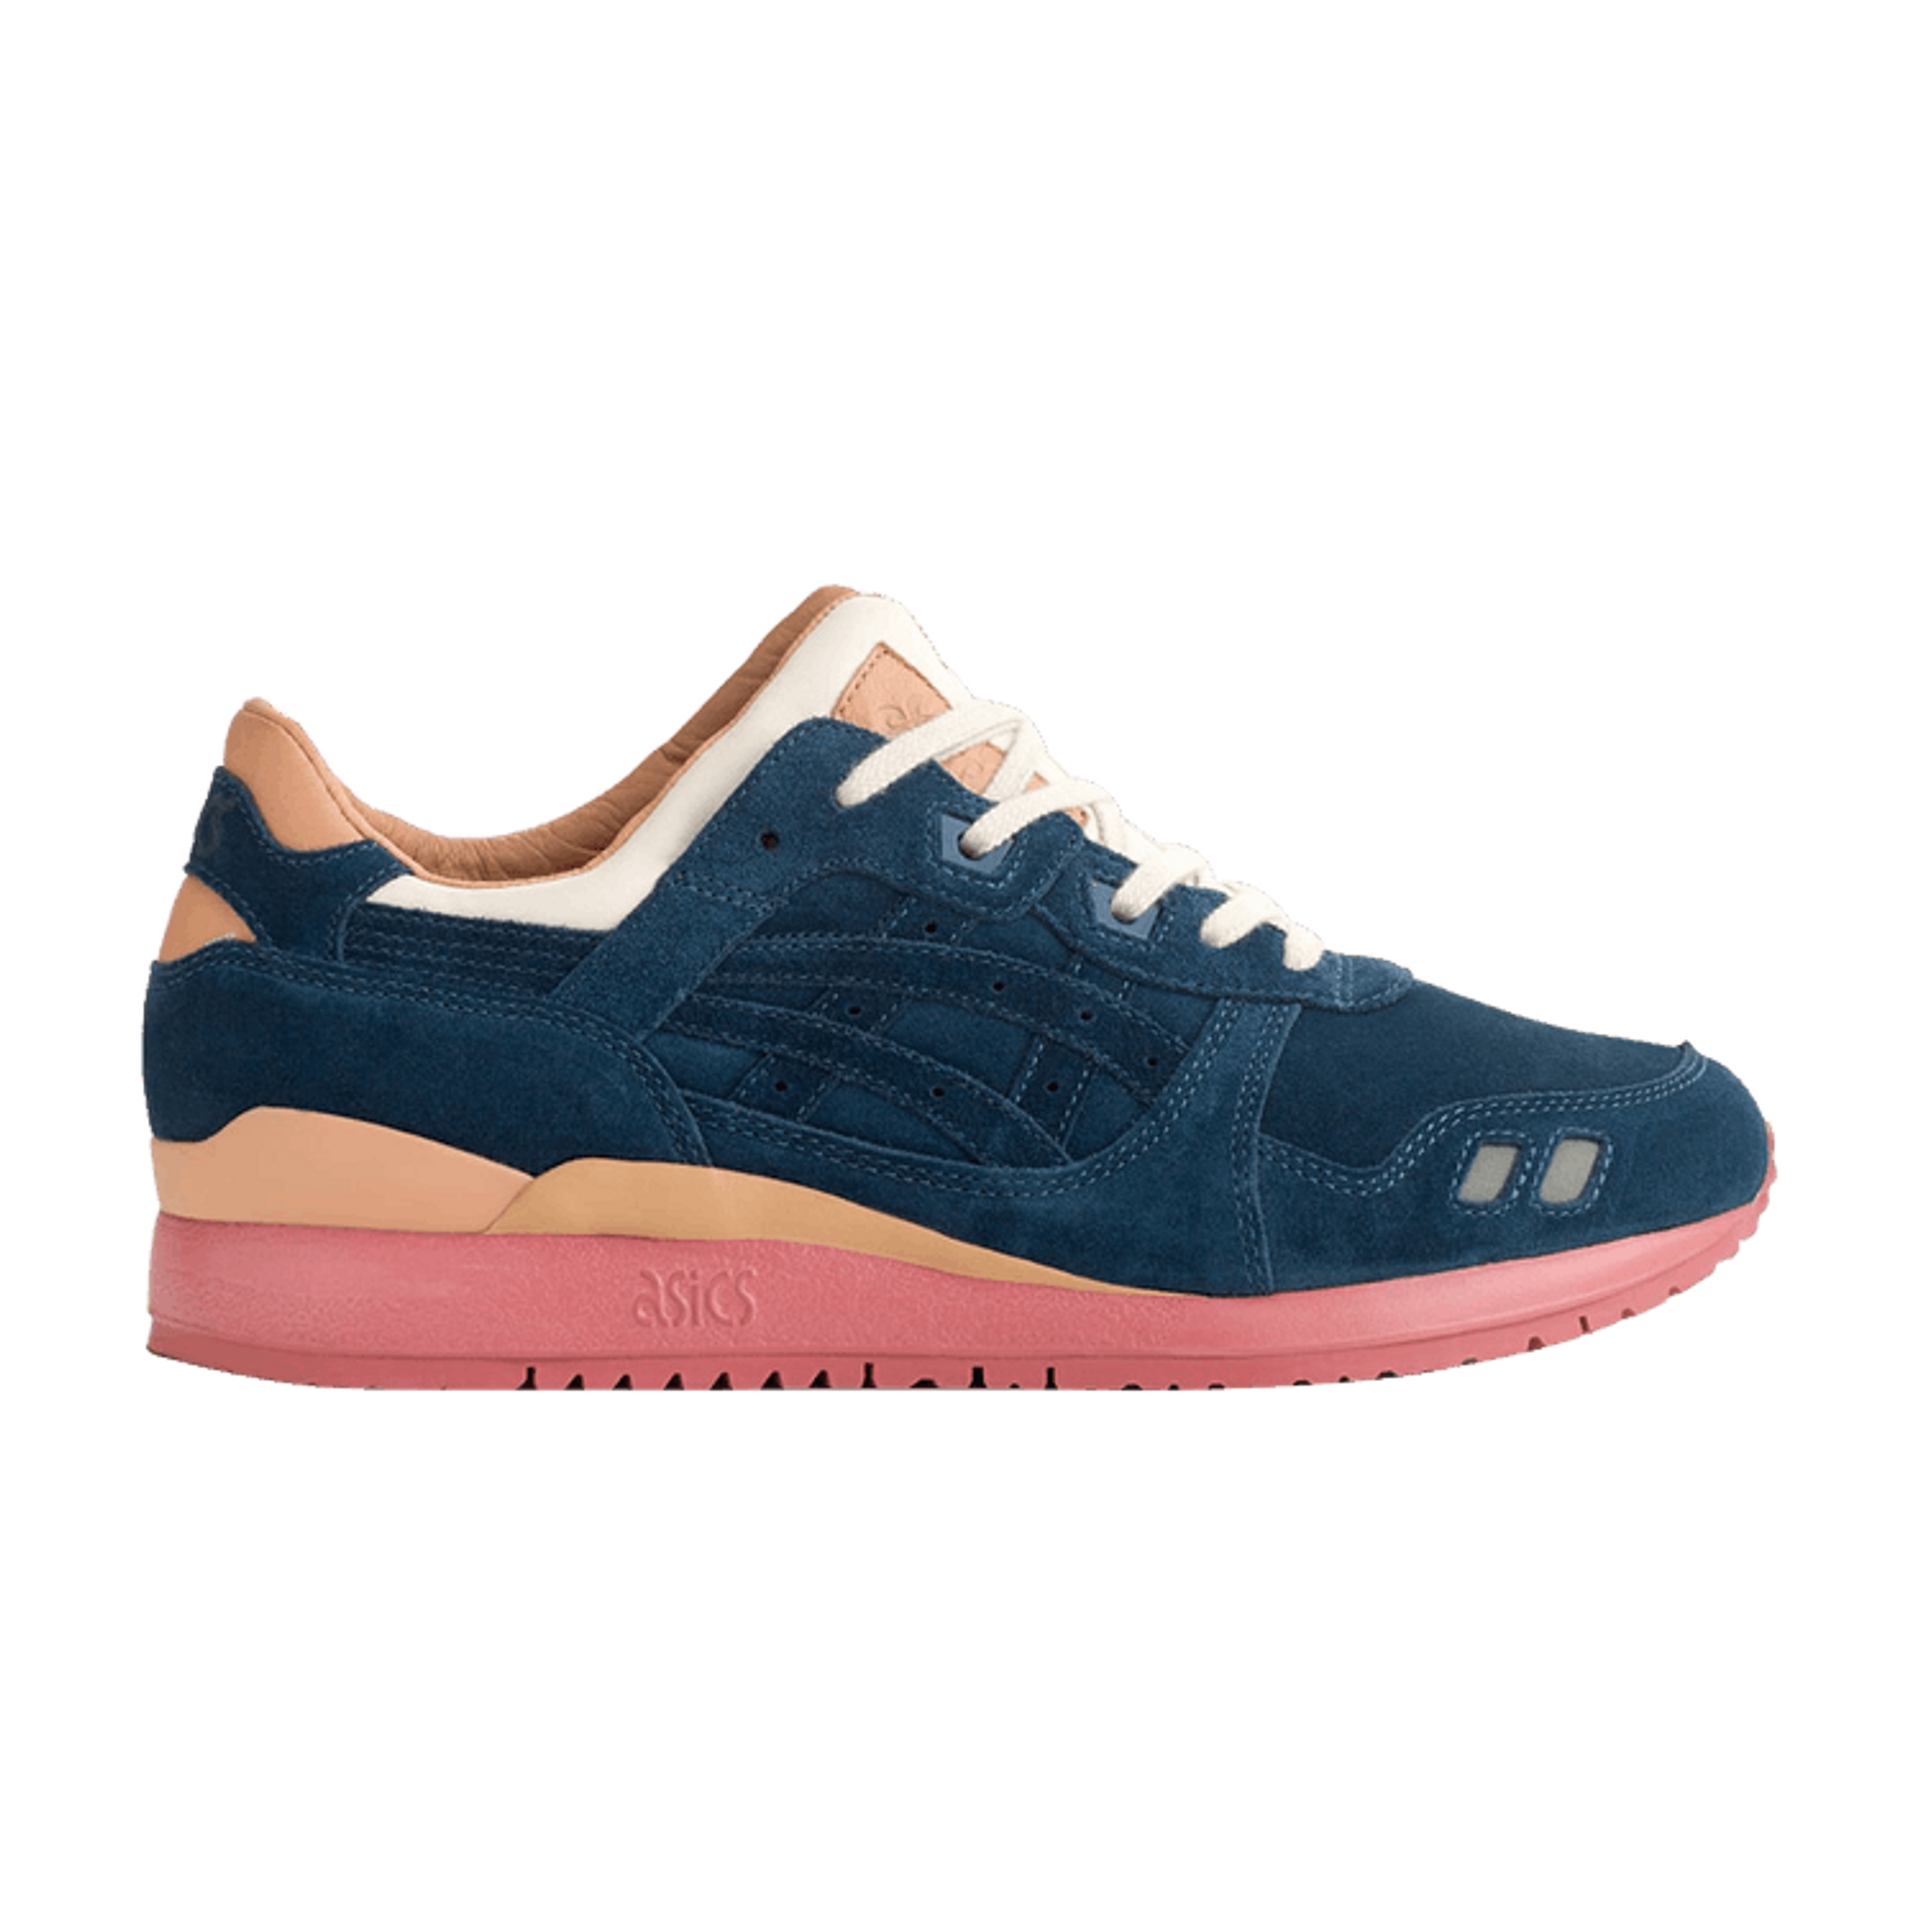 Packer Shoes x J.Crew x Gel Lyte 3 '1907 Collection Navy'